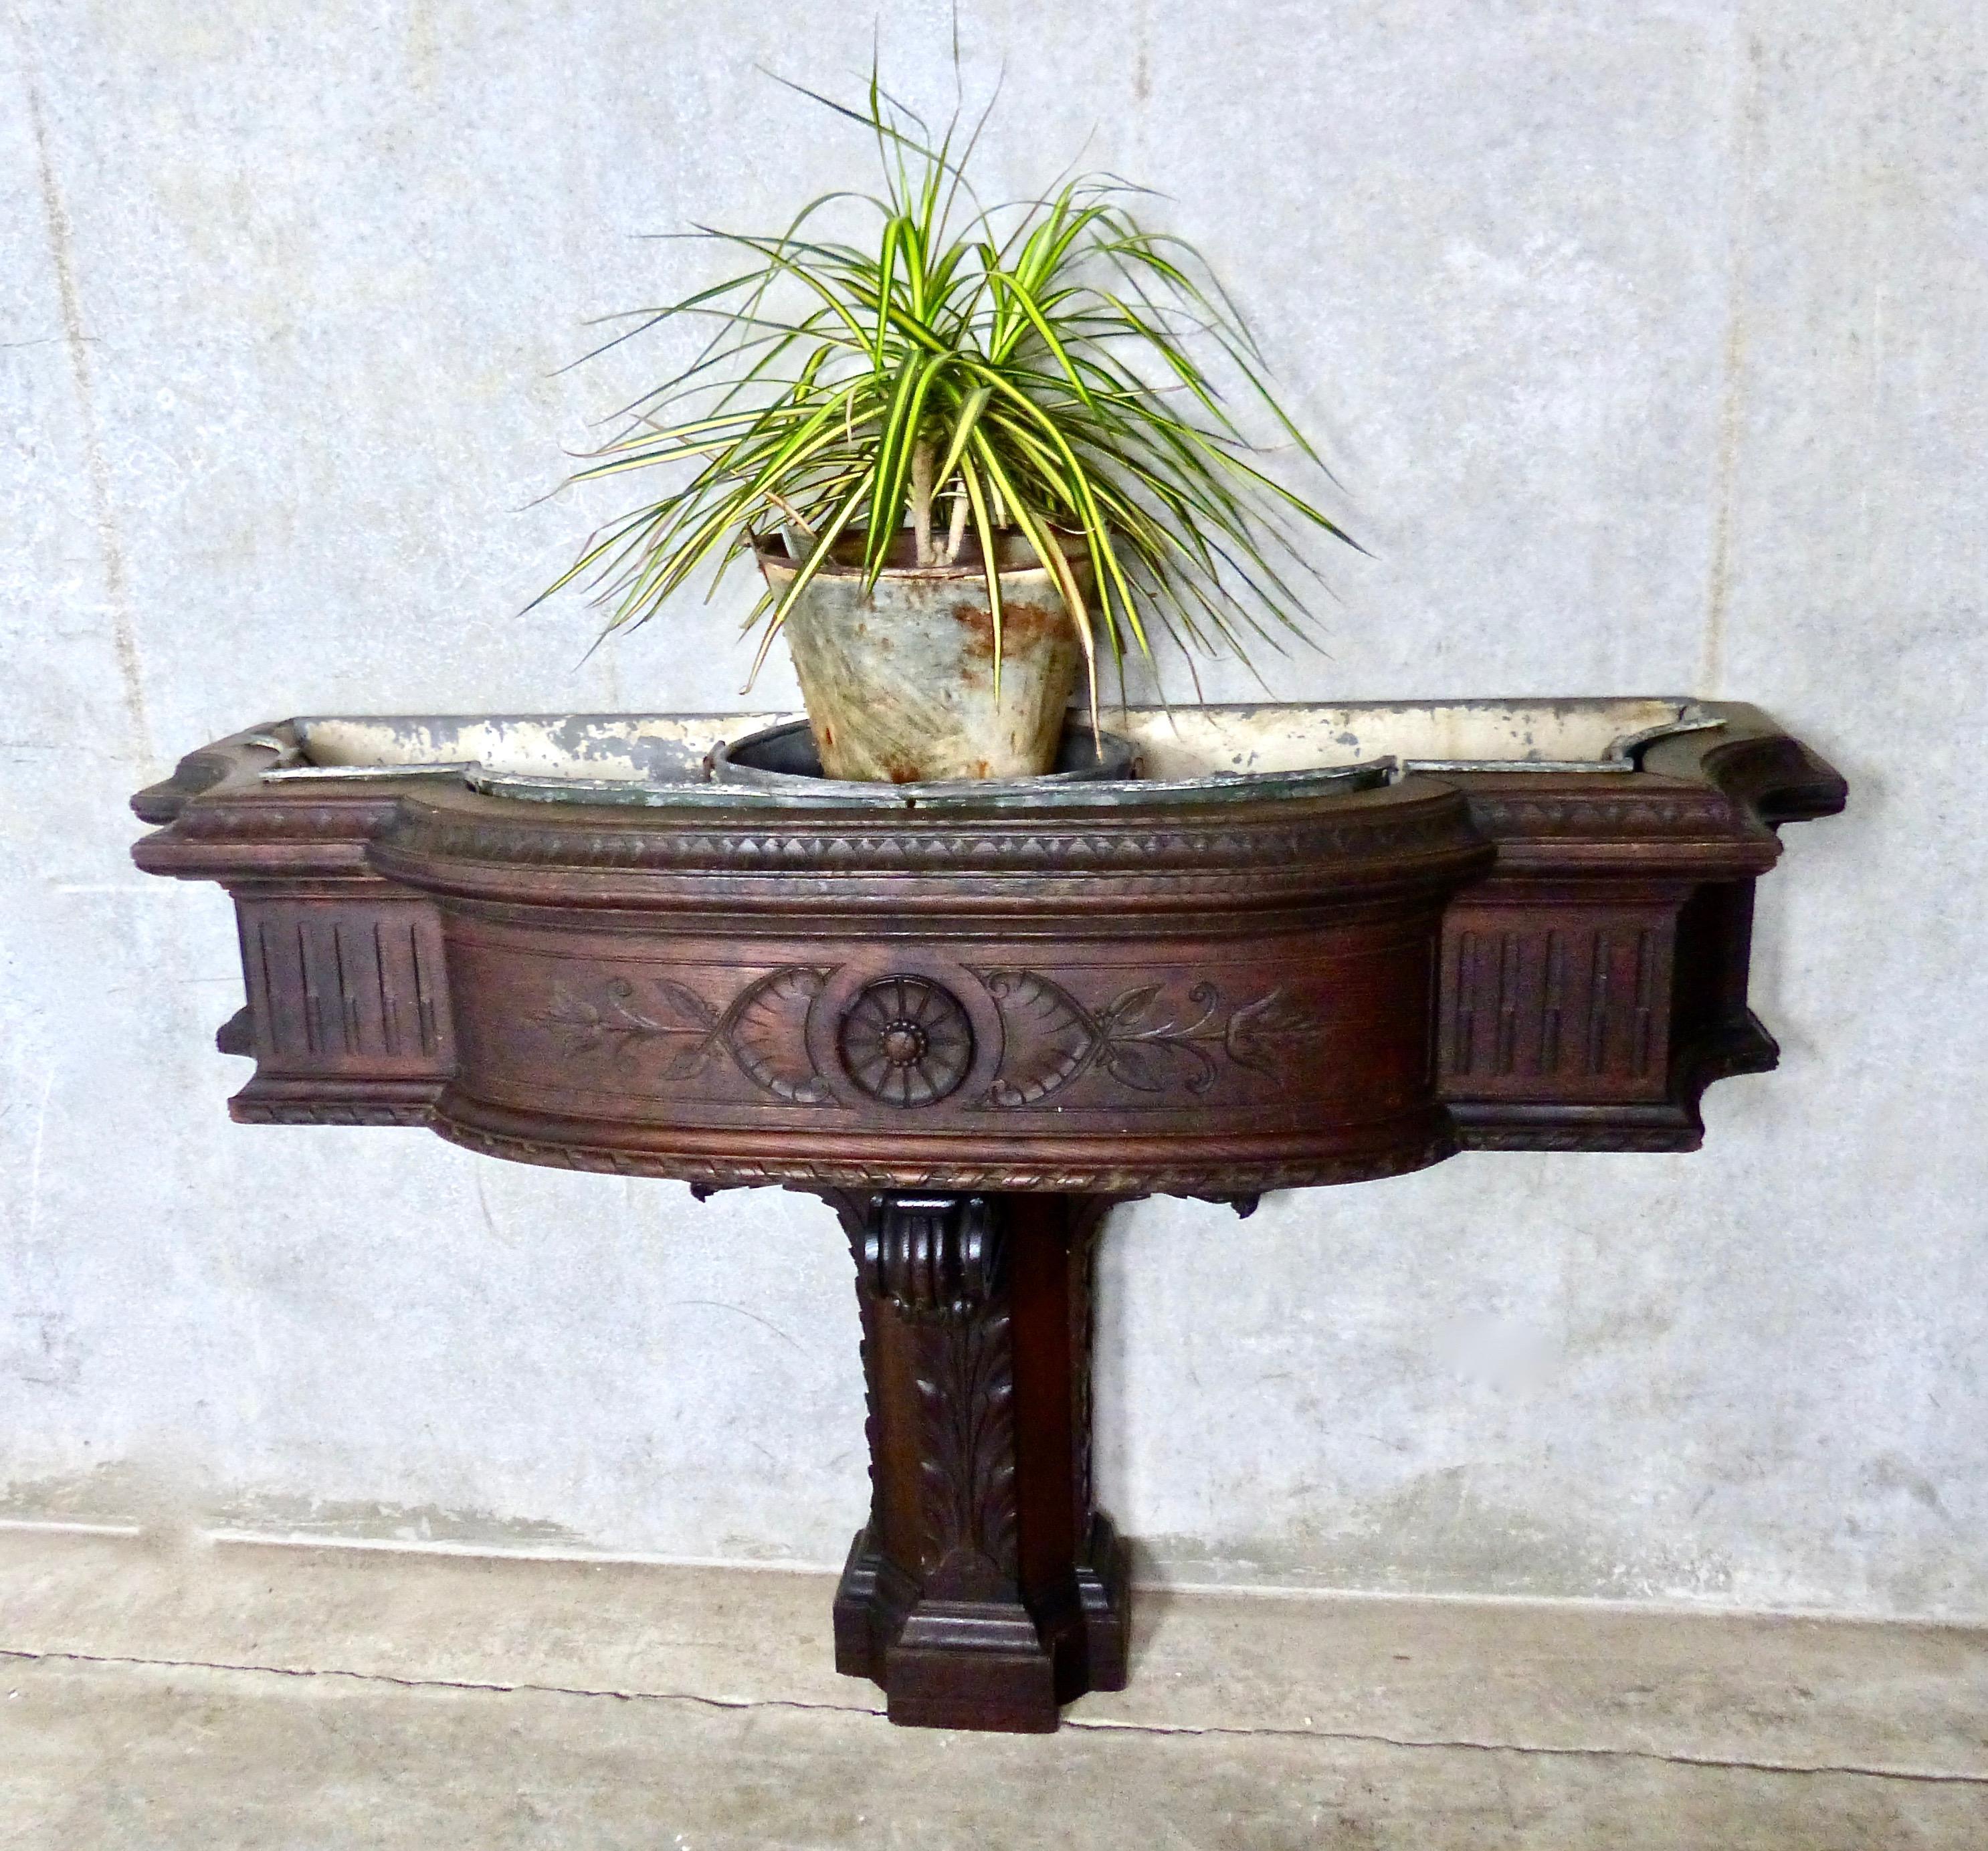 Indoor, wall-mounted plant stand. Hand made from oak, with intricately carved details, circa 1900. Includes original zinc liners for plants. A rare English -made piece with a wonderful patina.
retains original finish
Dimensions 37 H” x 56 W” x 17